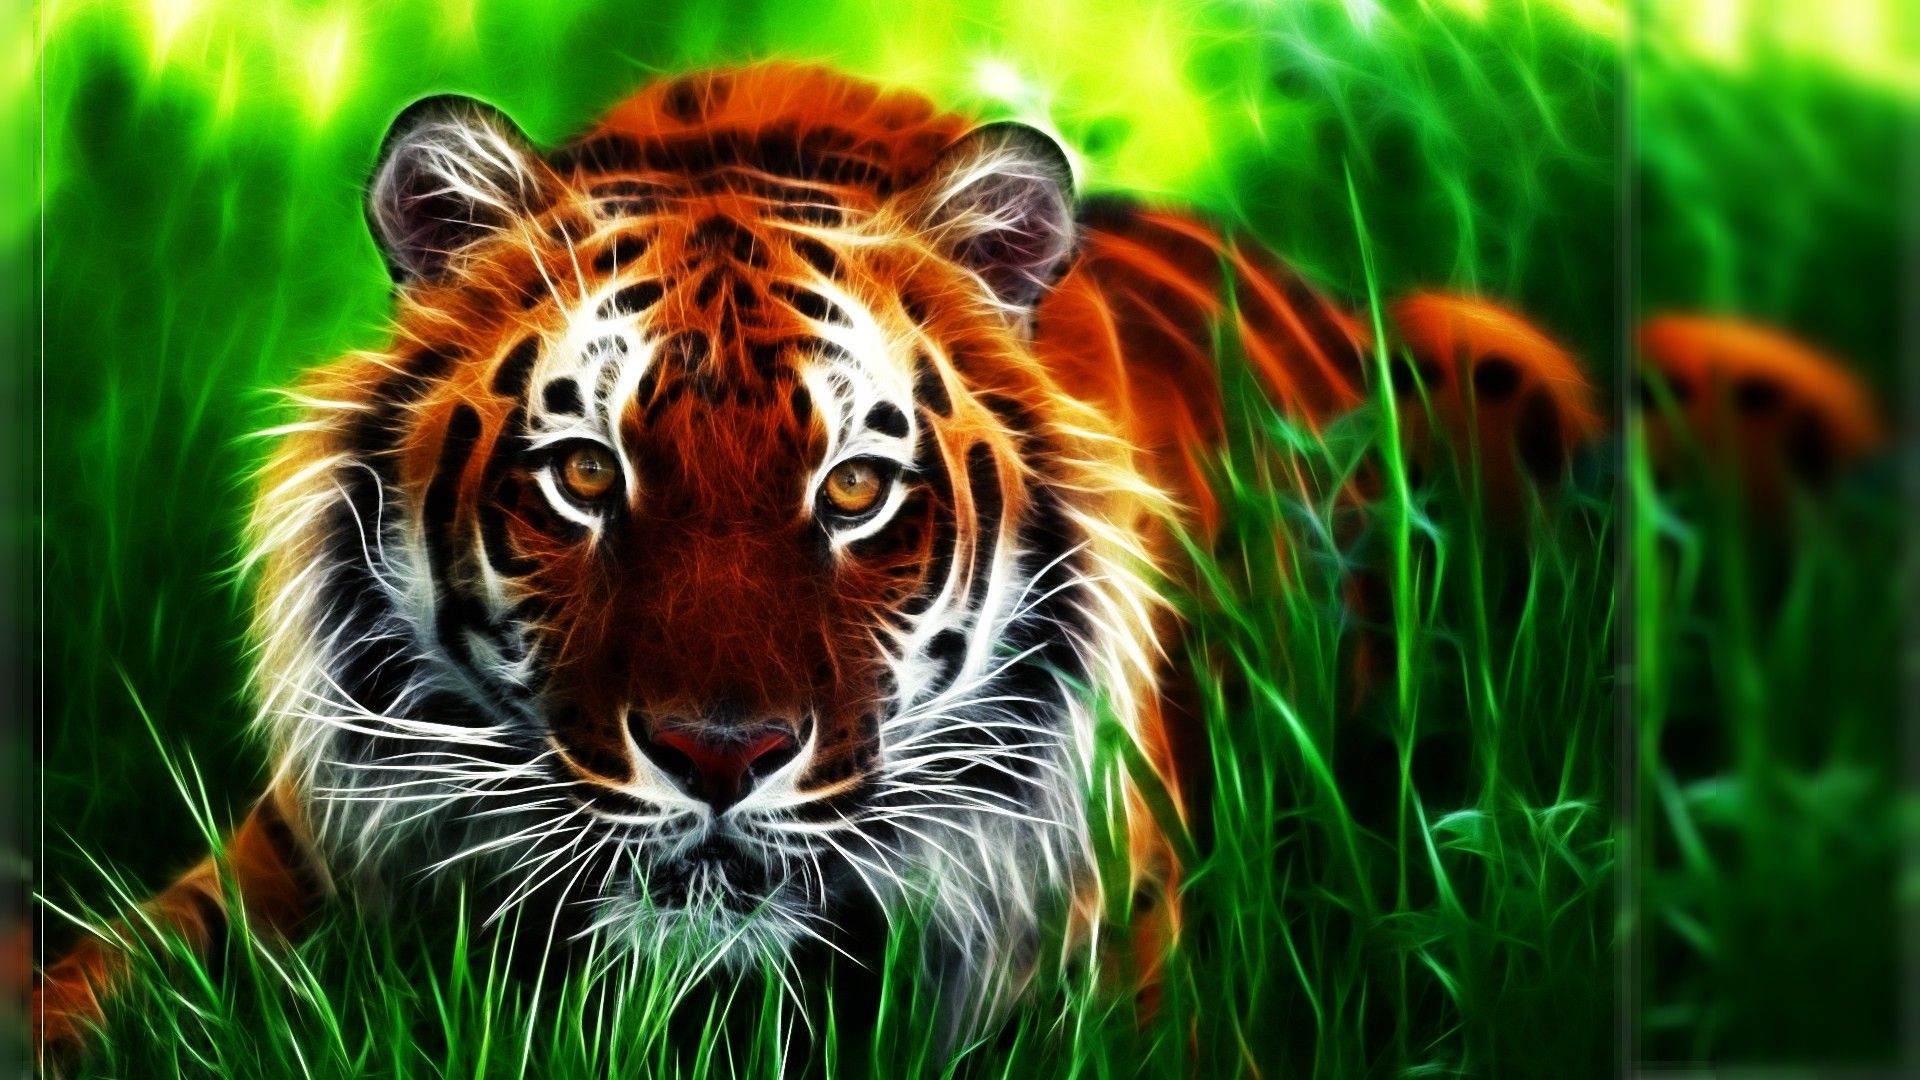 Tiger Wallpapers Tag - of 9 - Amazing Wallpaperz